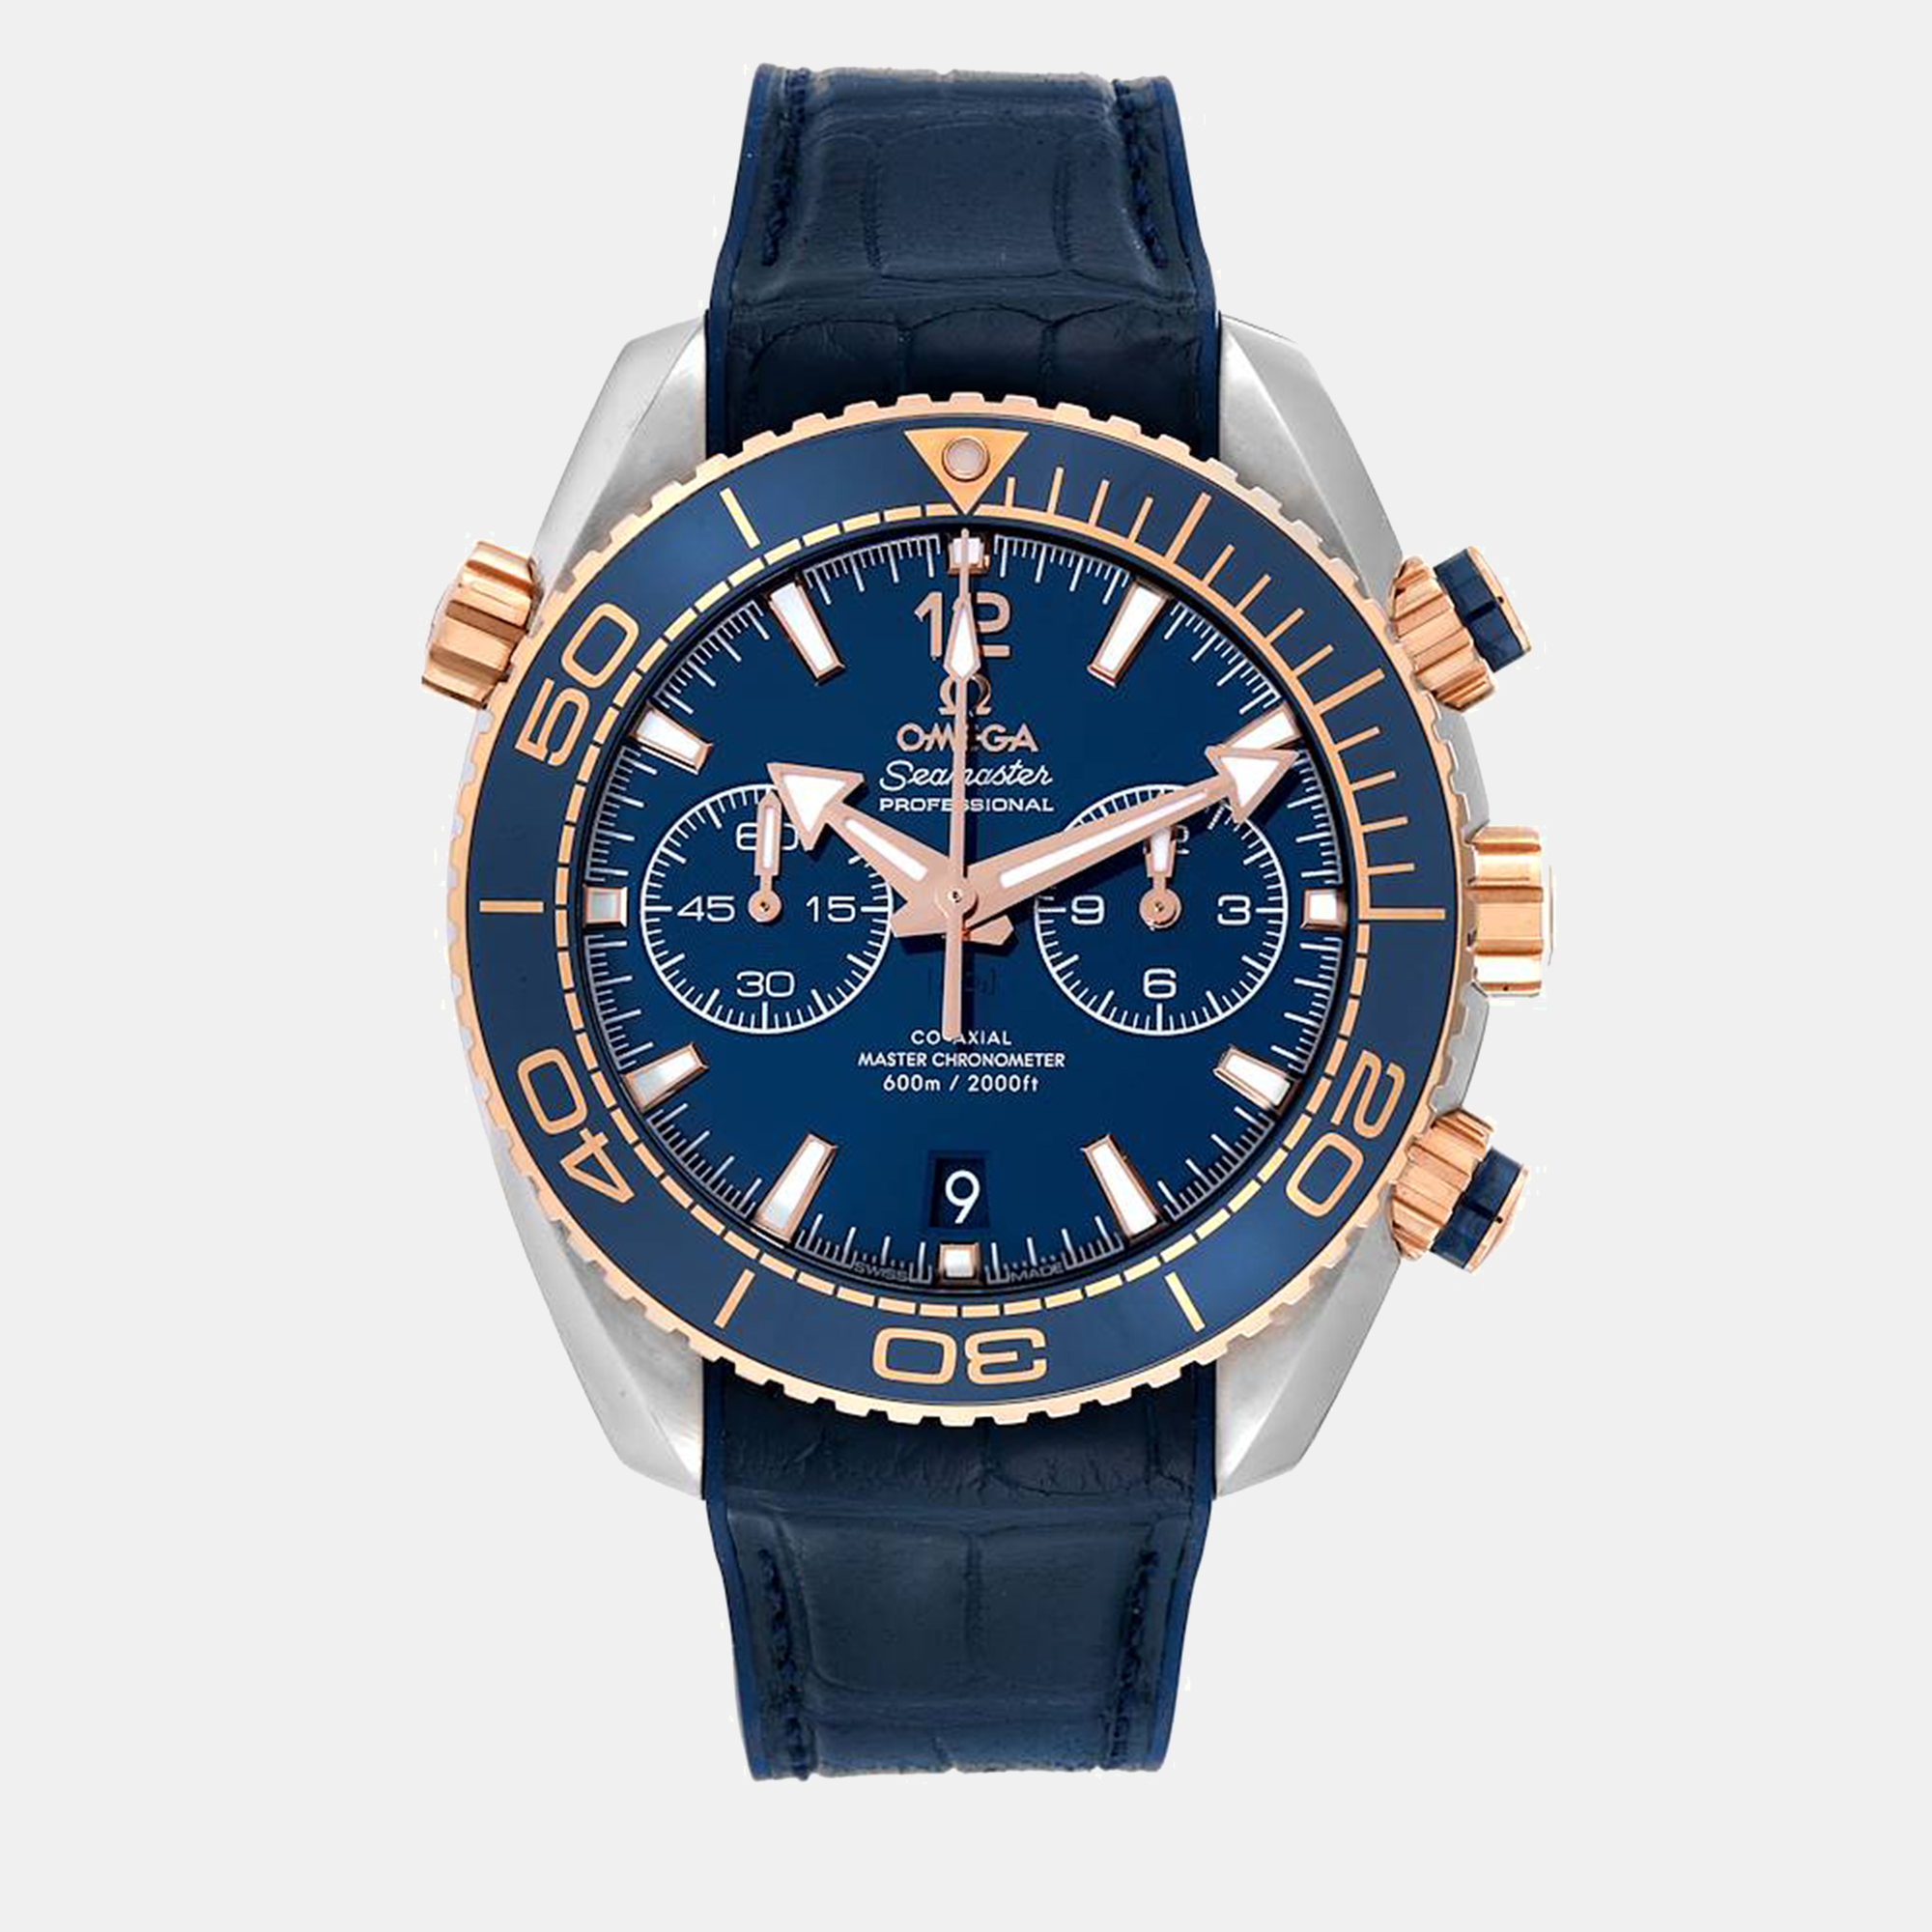 Omega blue 18k rose gold stainless steel seamaster planet ocean 215.23.46.51.03.001 automatic men's wristwatch 45.5 mm